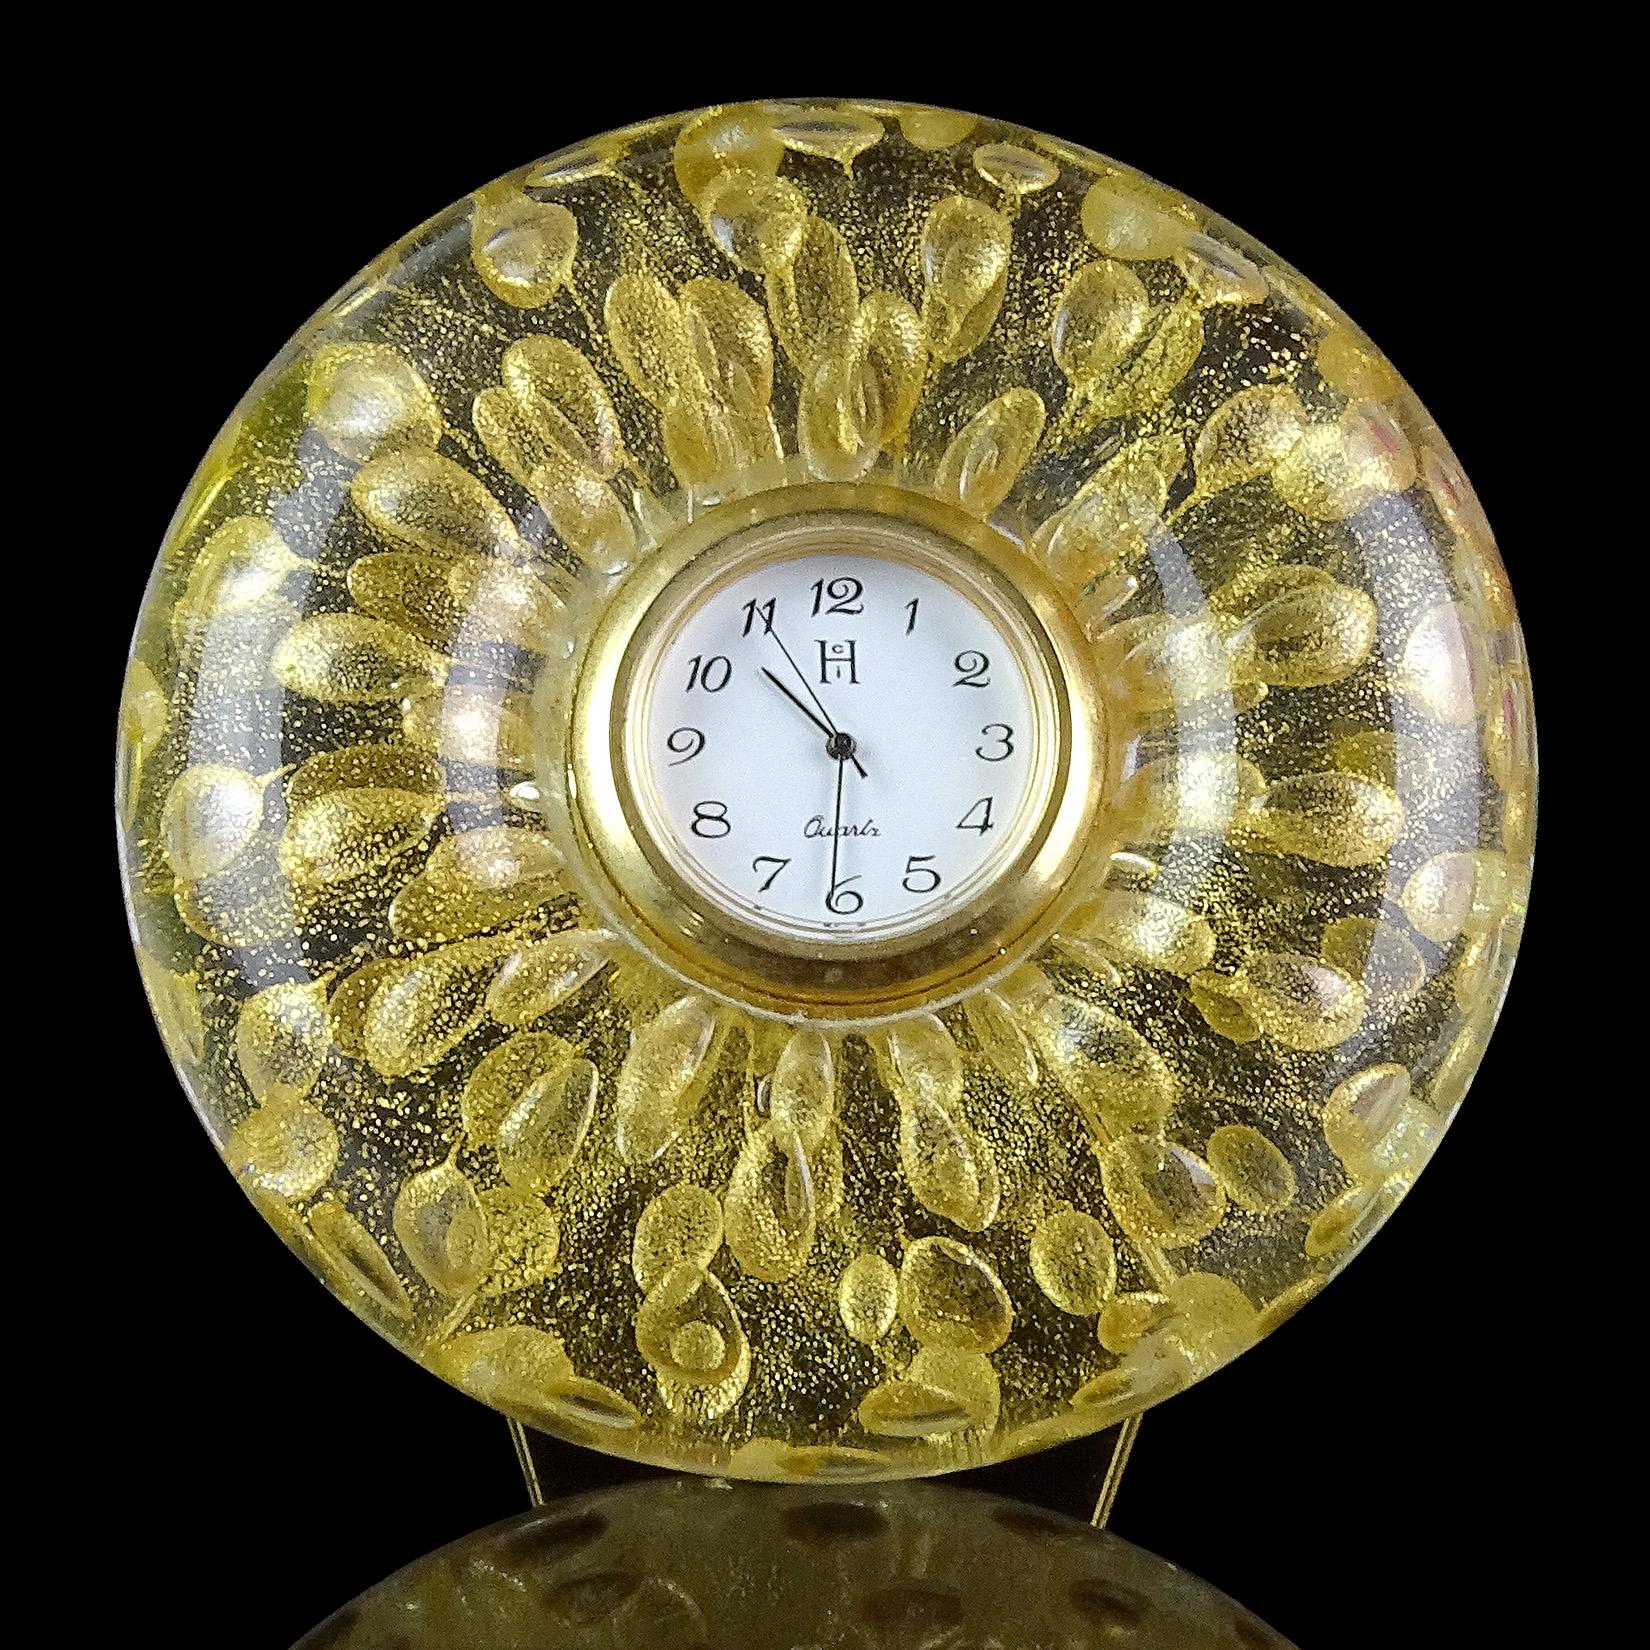 Beautiful Murano hand blown controlled bubbles and gold flecks Italian art glass desk clock. It has a Quartz clock face, a triangle Stand on the back, and battery operated clock face (needs new battery). Great piece for any desk, bedside table or